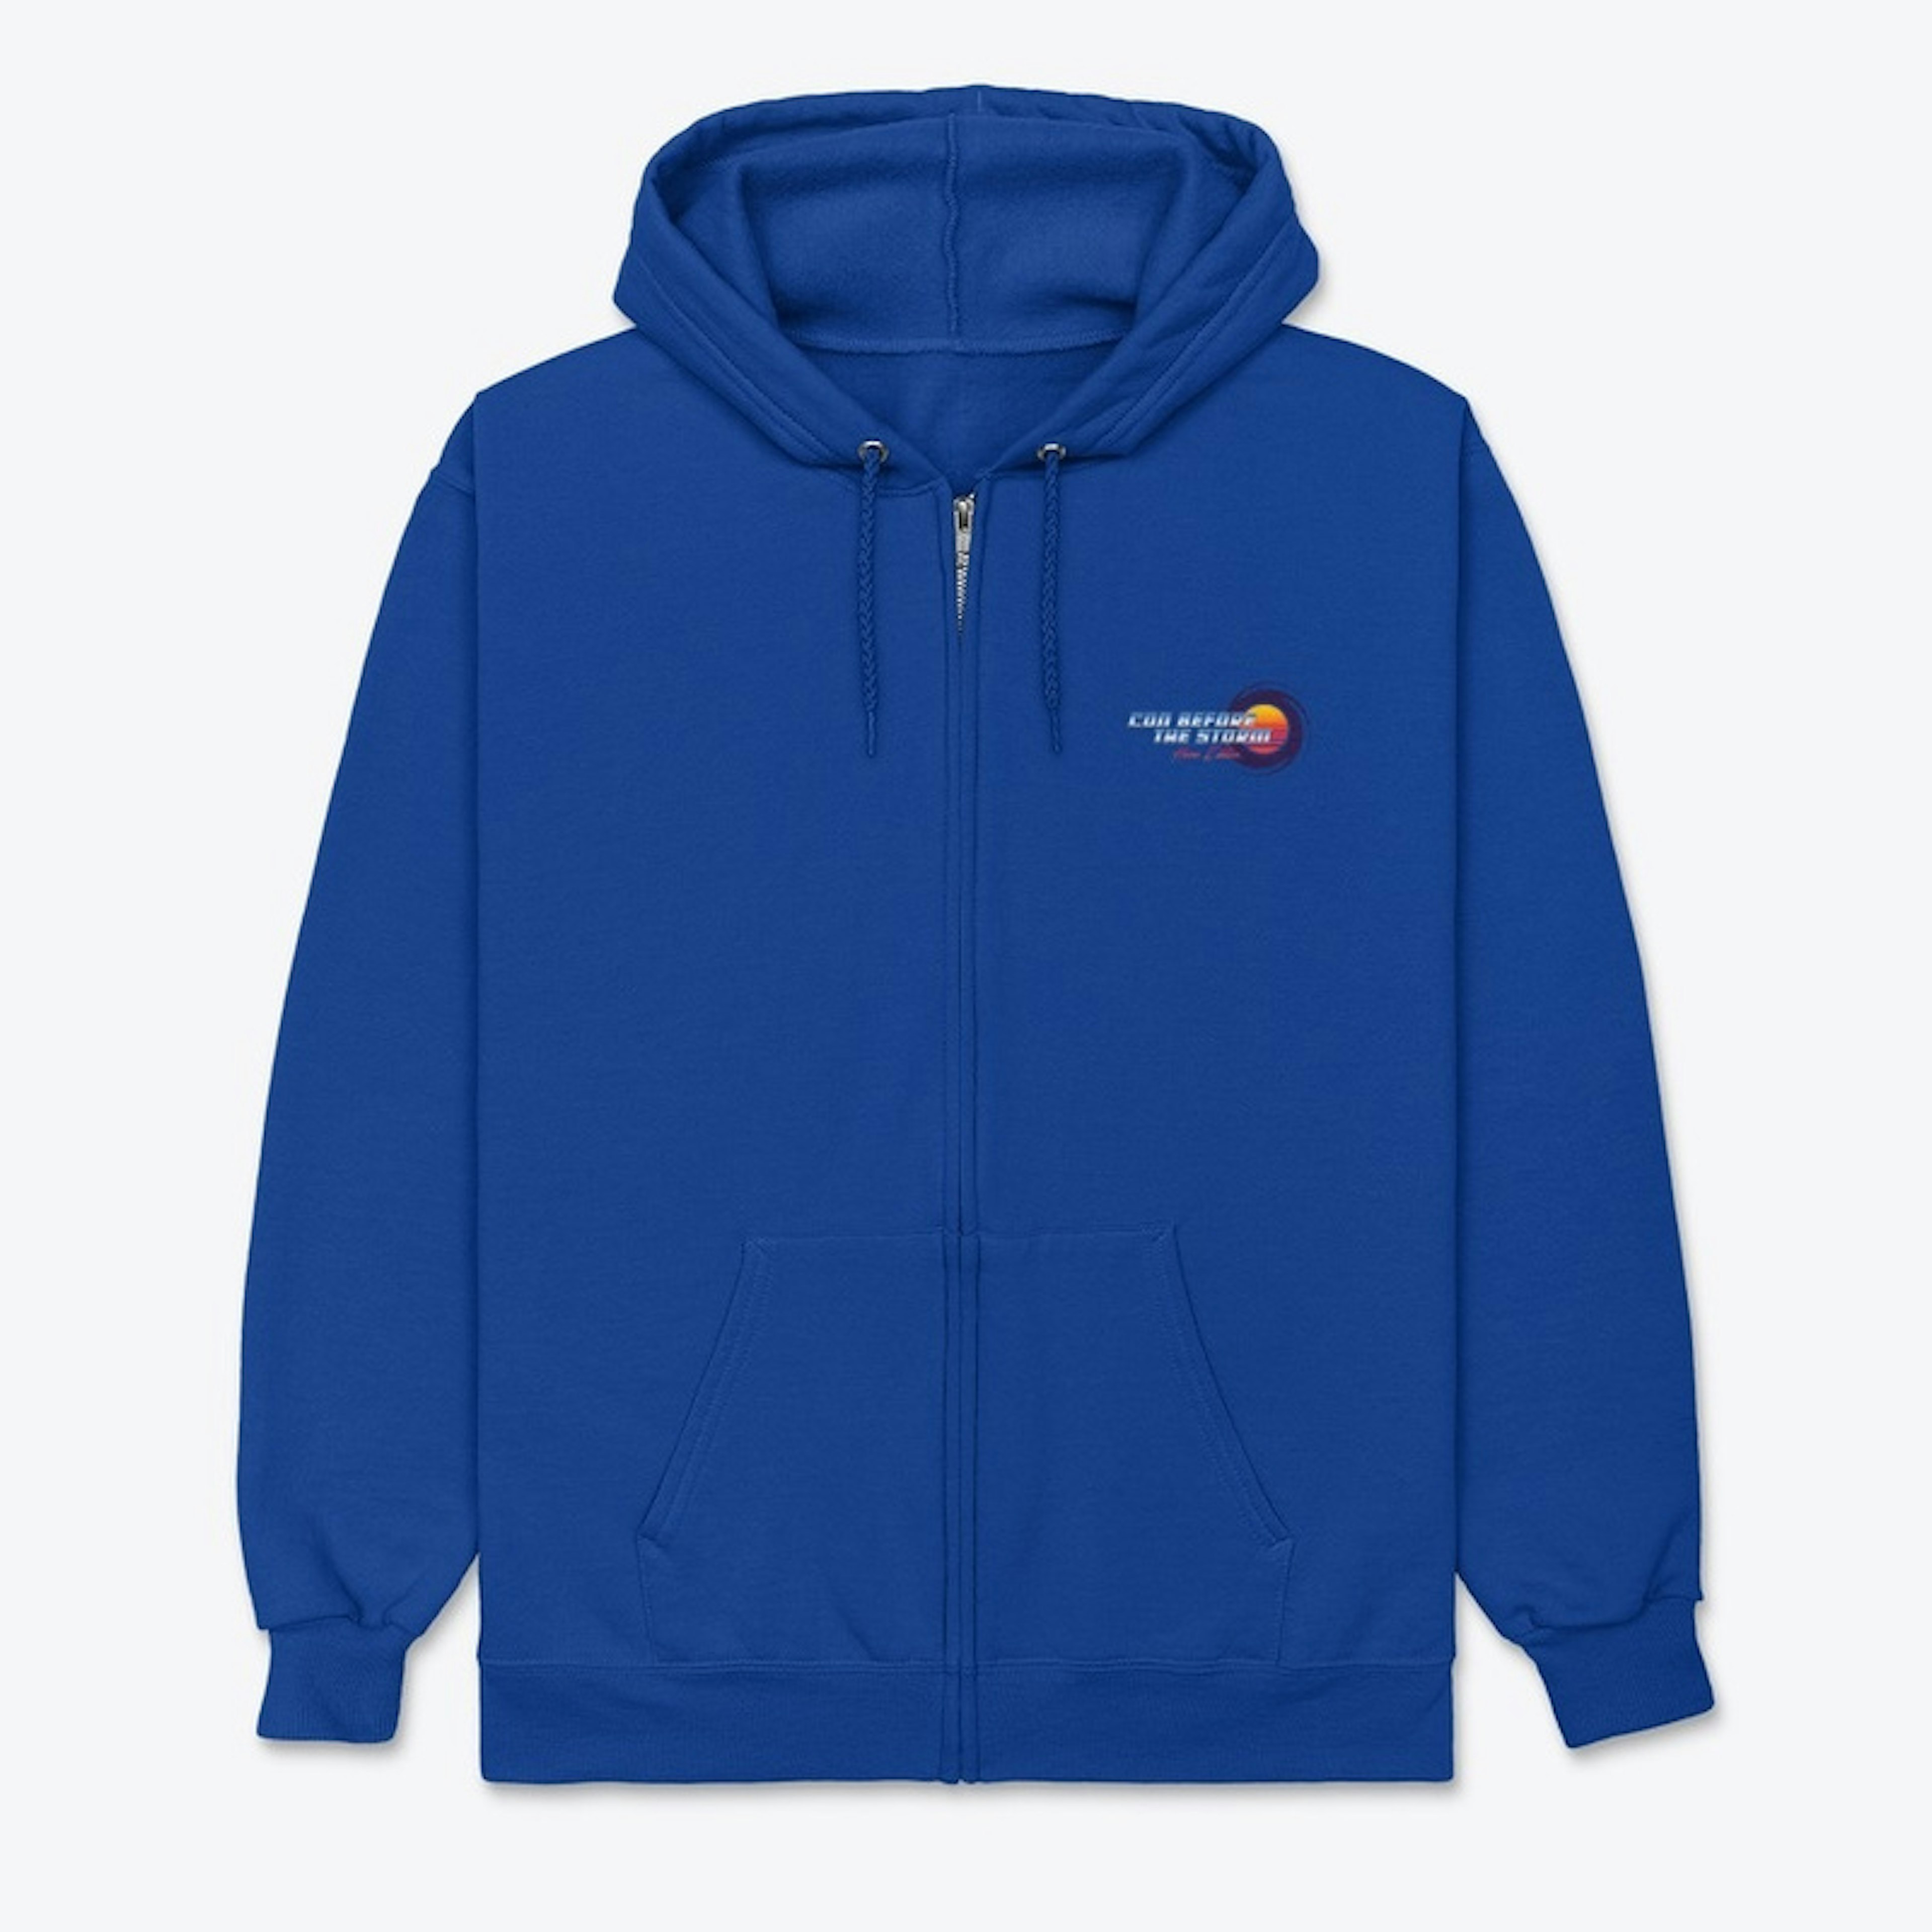 CBTS Home Edition Zip Up Hoodie